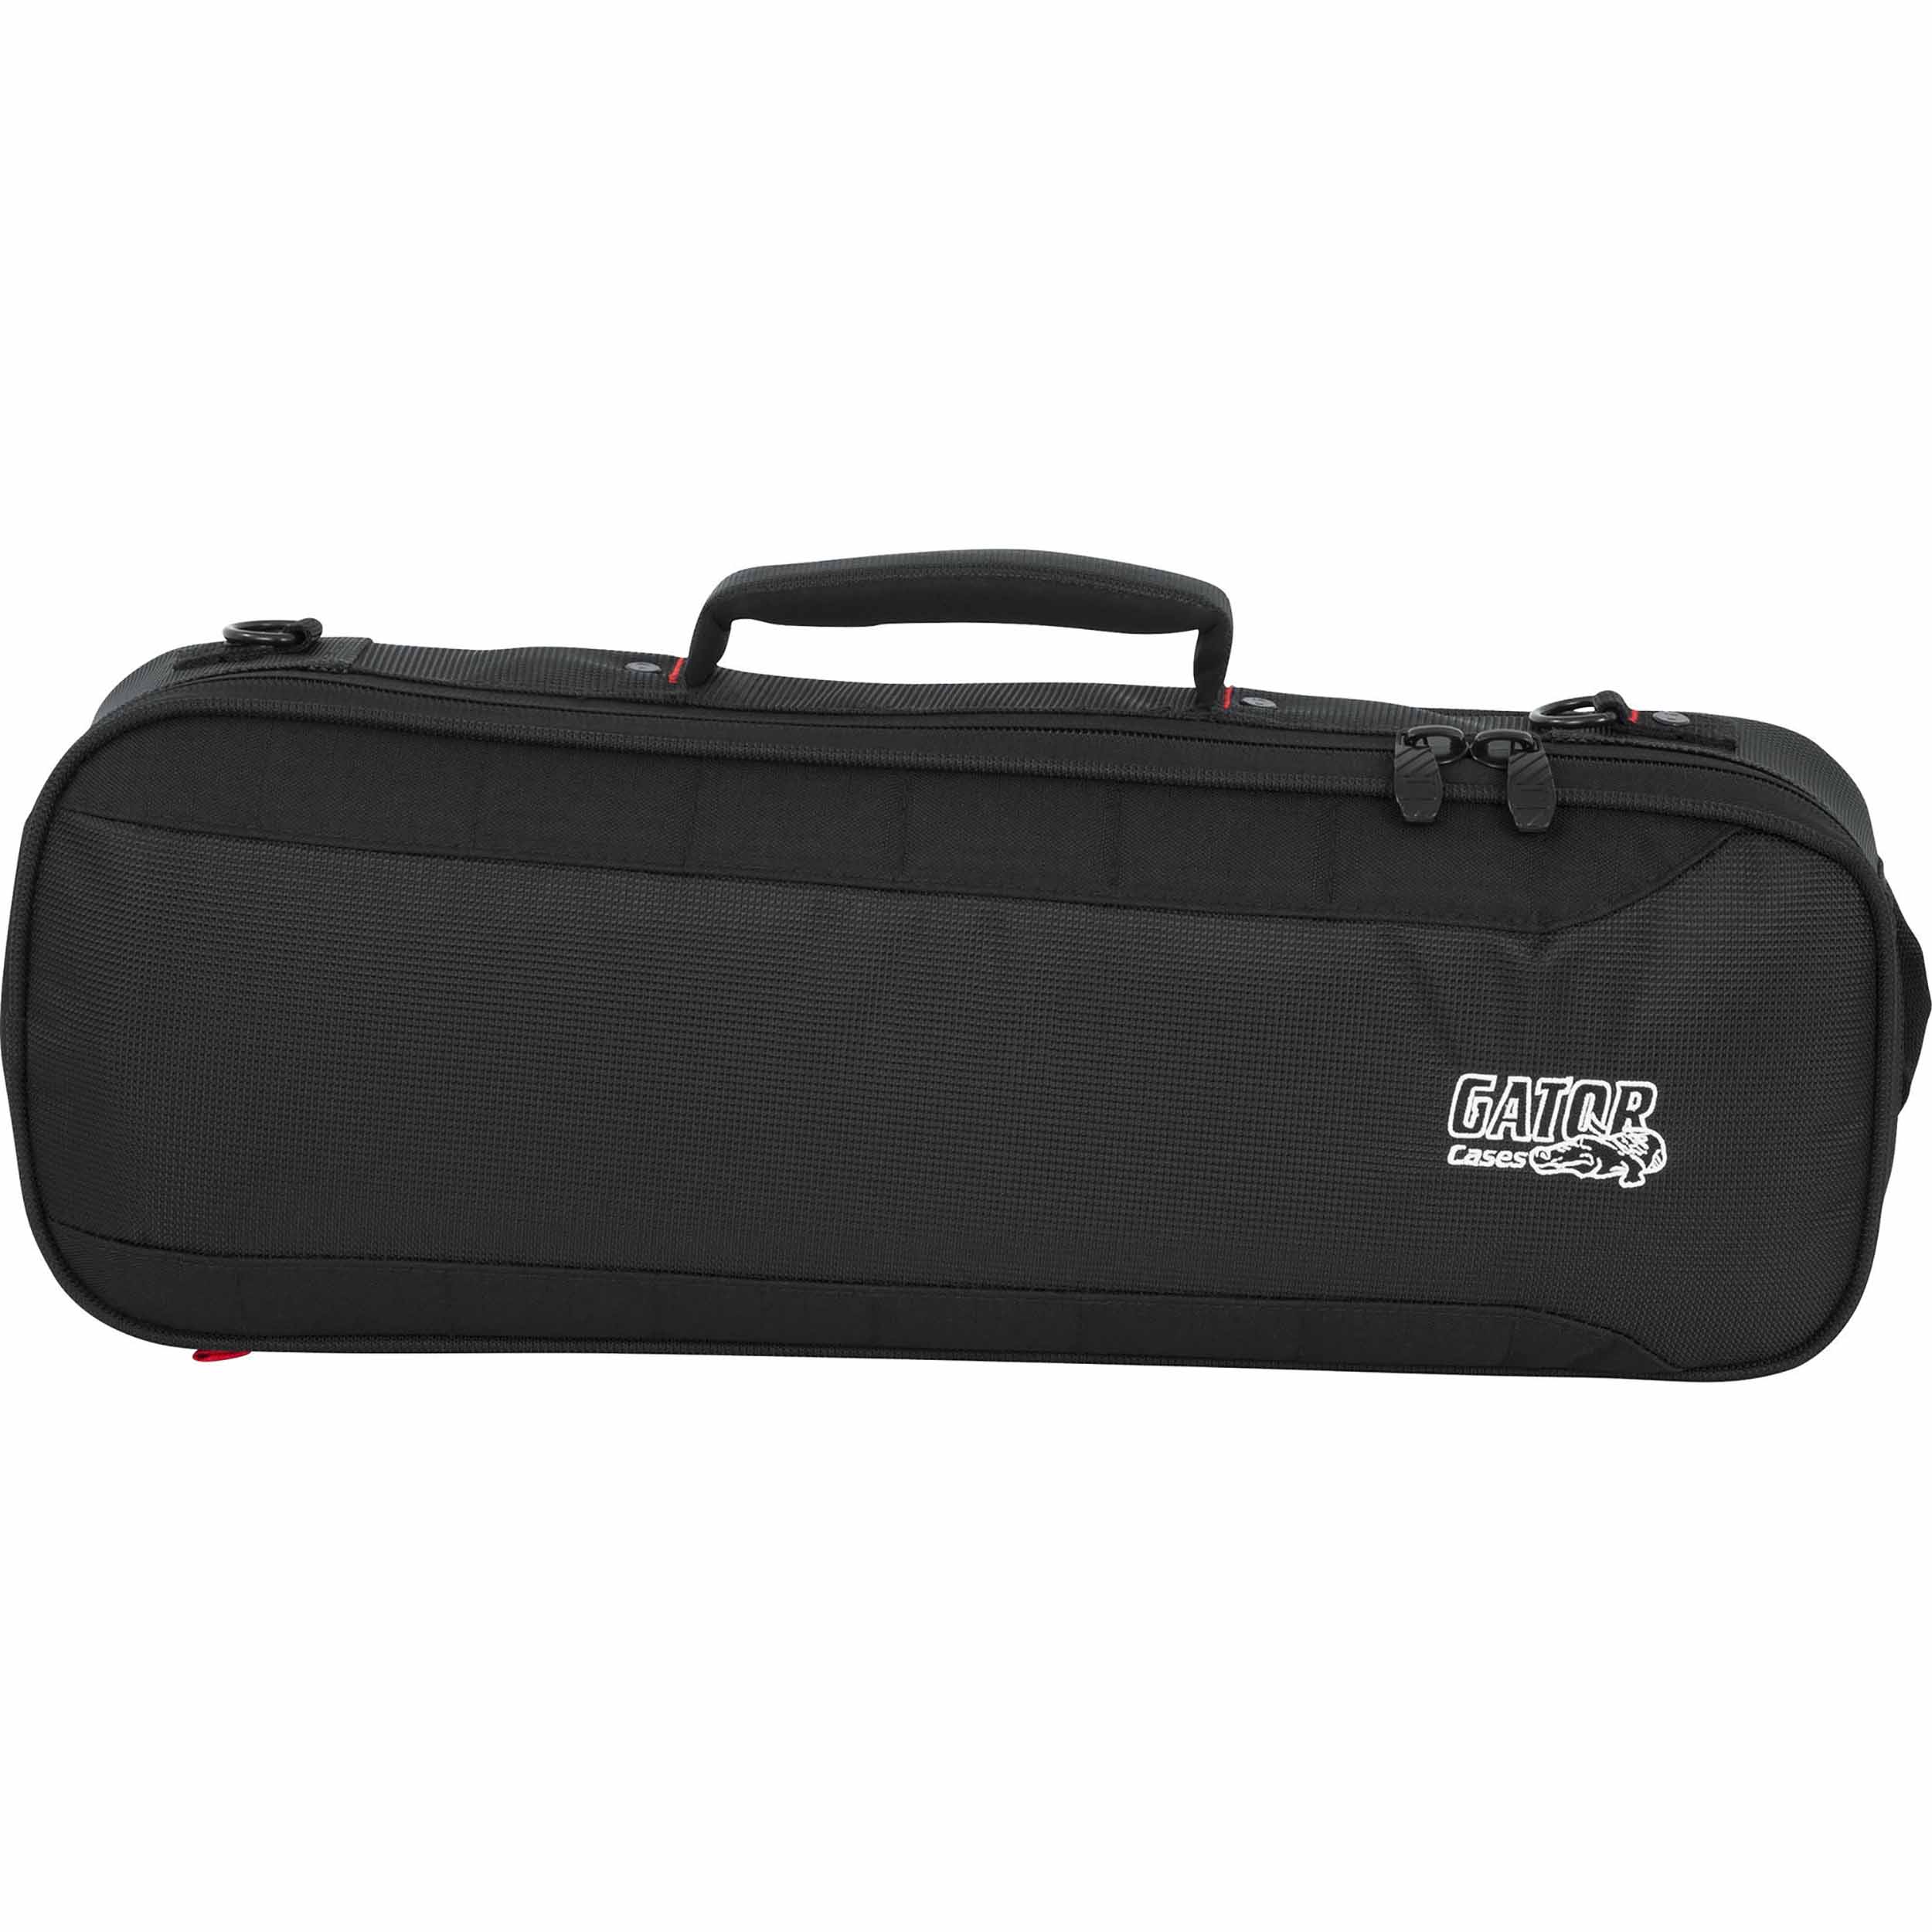 Gator G-PG-TRUMPET Ultimate Gig Bag for Trumpet | Open Box by Gator Cases